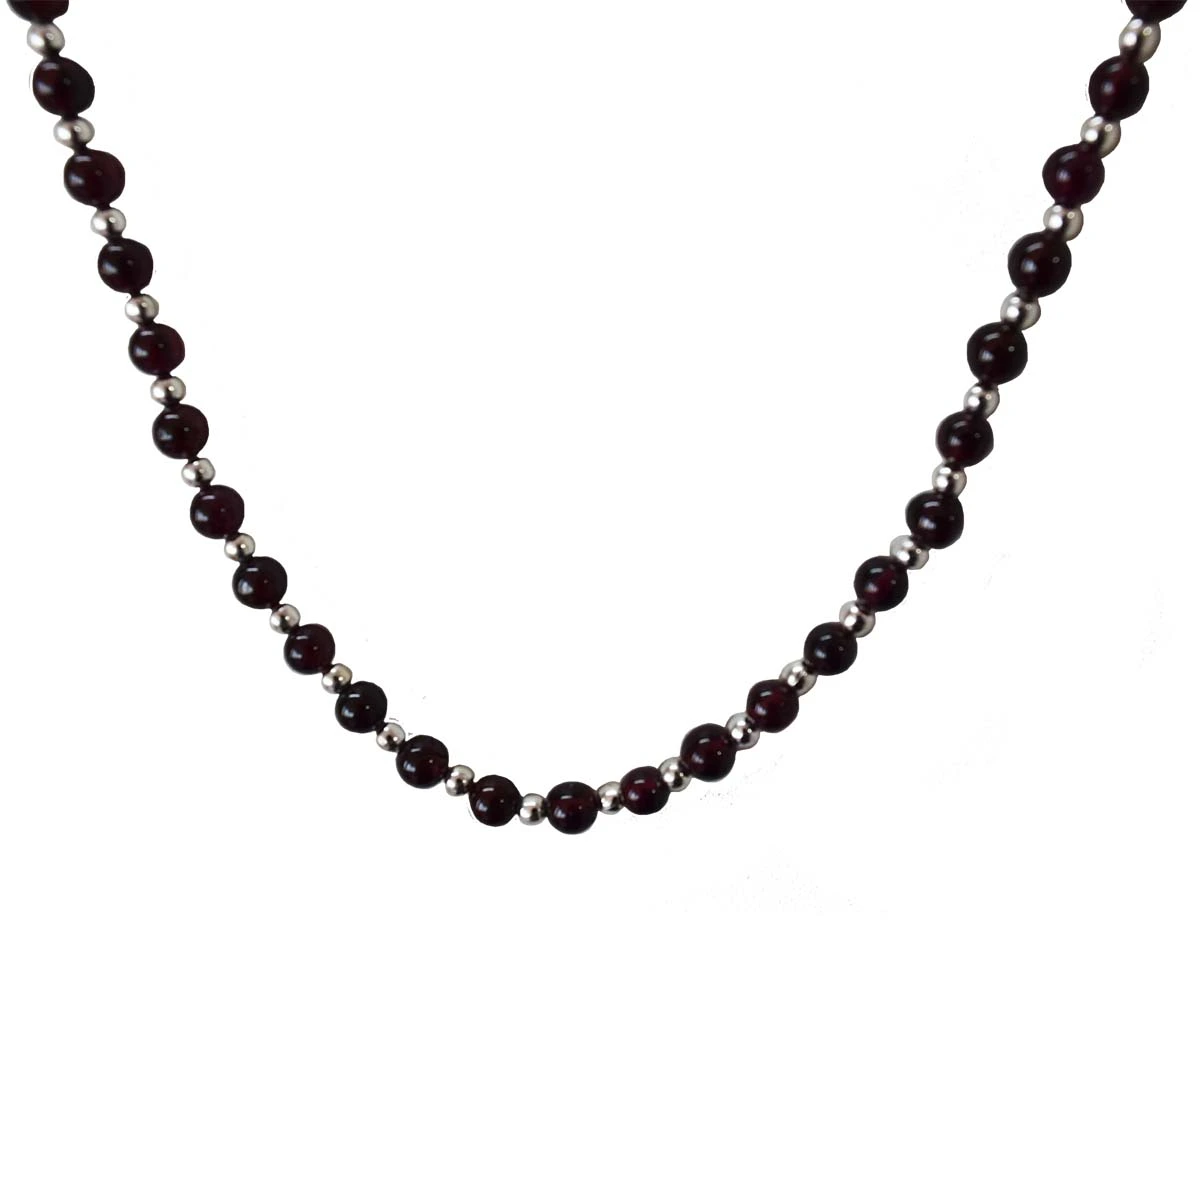 Single Line Black Onyx & Silver Plated Beads Necklace for Women (SN991)